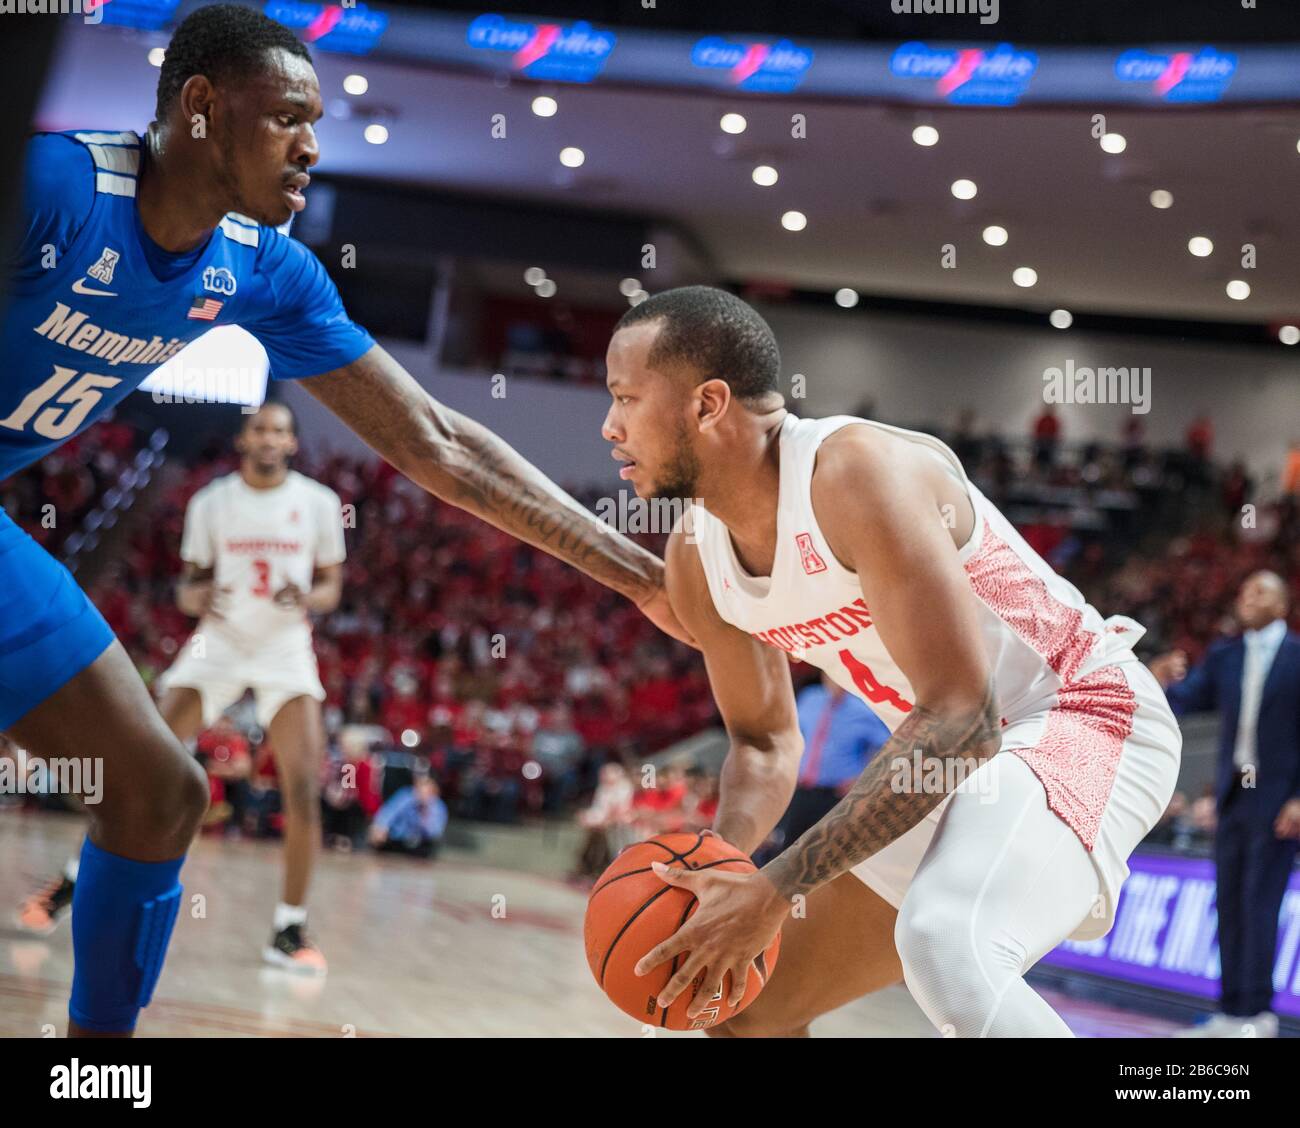 March 8, 2020: Houston Cougars forward Justin Gorham (4) is defended by Memphis Tigers forward Lance Thomas (15) in the NCAA basketball game between the Memphis Tigers and the Houston Cougars at the Fertitta Center in Houston, Texas. Houston defeated Memphis 64-57. Prentice C. James/CSM Stock Photo